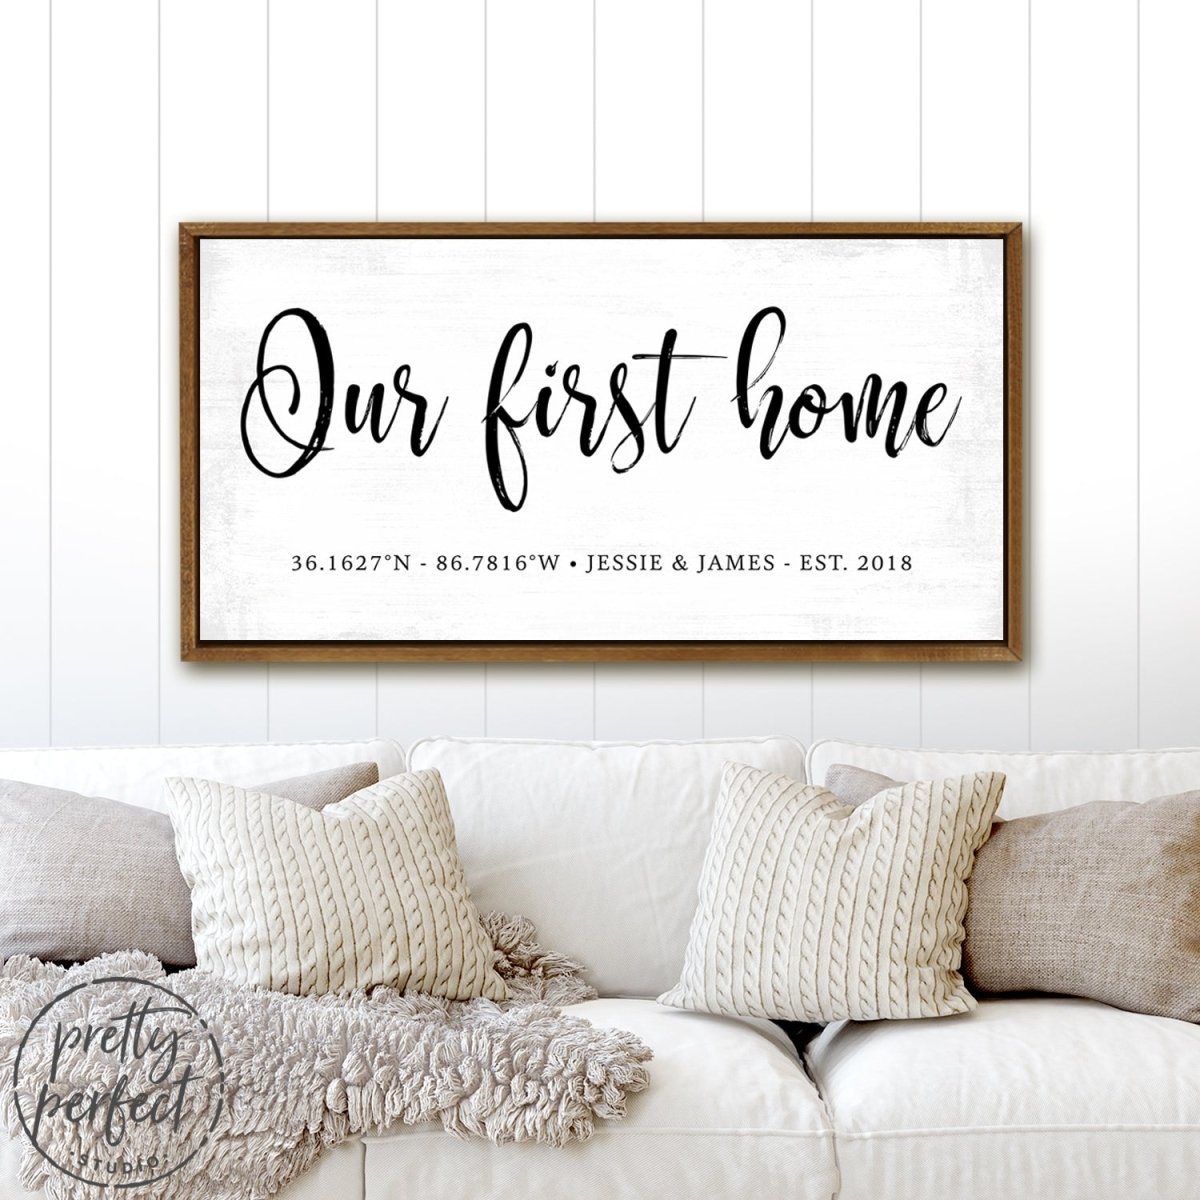 Our First Home Sign Personalized with Coordinates, Name & Established Date Above Couch - Pretty Perfect Studio